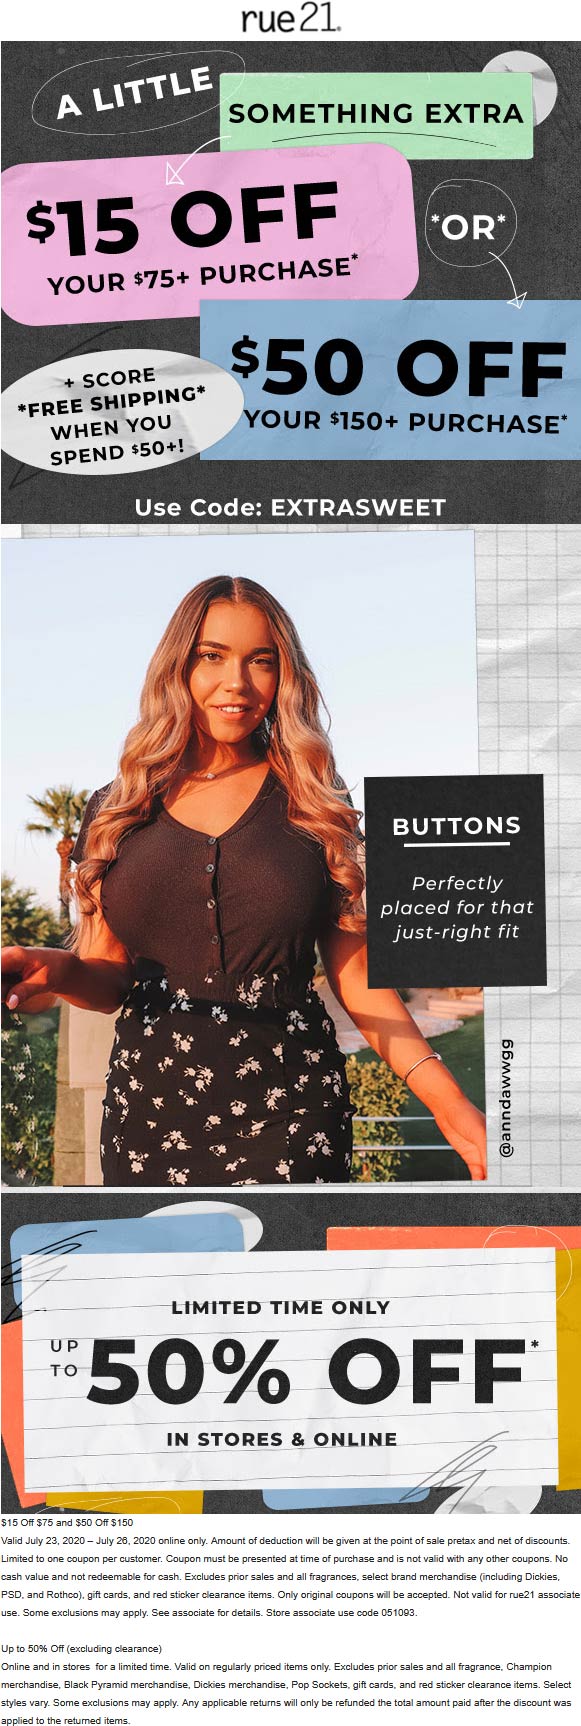 rue21 stores Coupon  $15 off $75 & more today online at rue21 via promo code EXTRASWEET #rue21 fashion model explorepage forever21 ootd fashionnova explore instagram love photography youinrue 